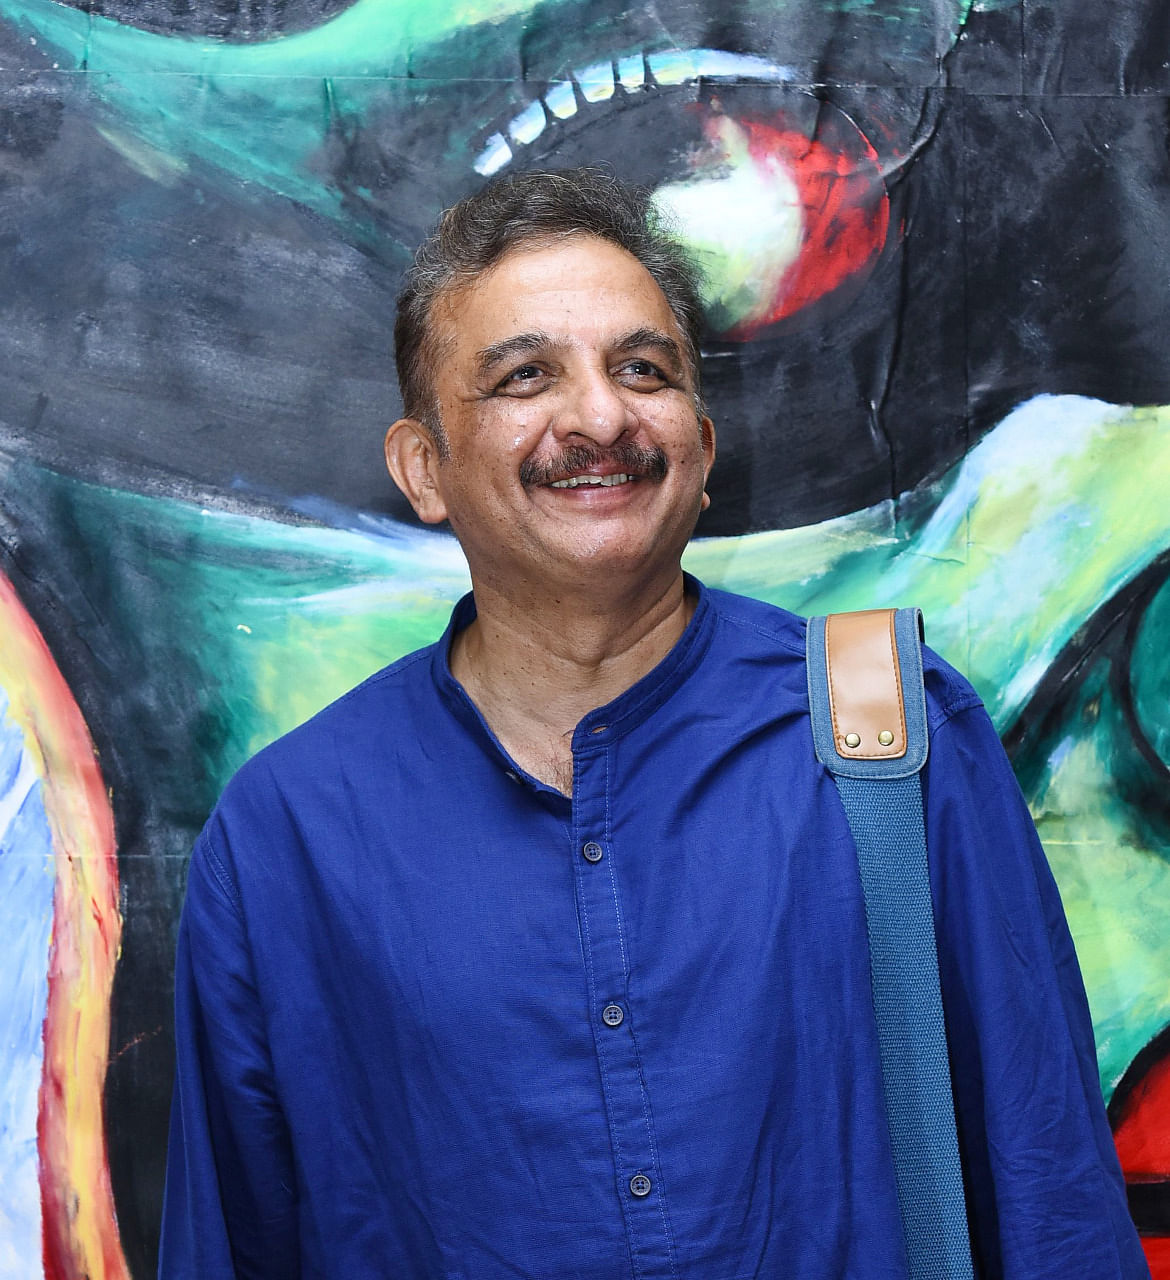 Short story writer, playwright, and lyricist Jayant Kaikini has spent more than 15 years in the Kannada film industry. He has over 250 films and 350 songs to his credit. He is also the recipient of several literary awards.